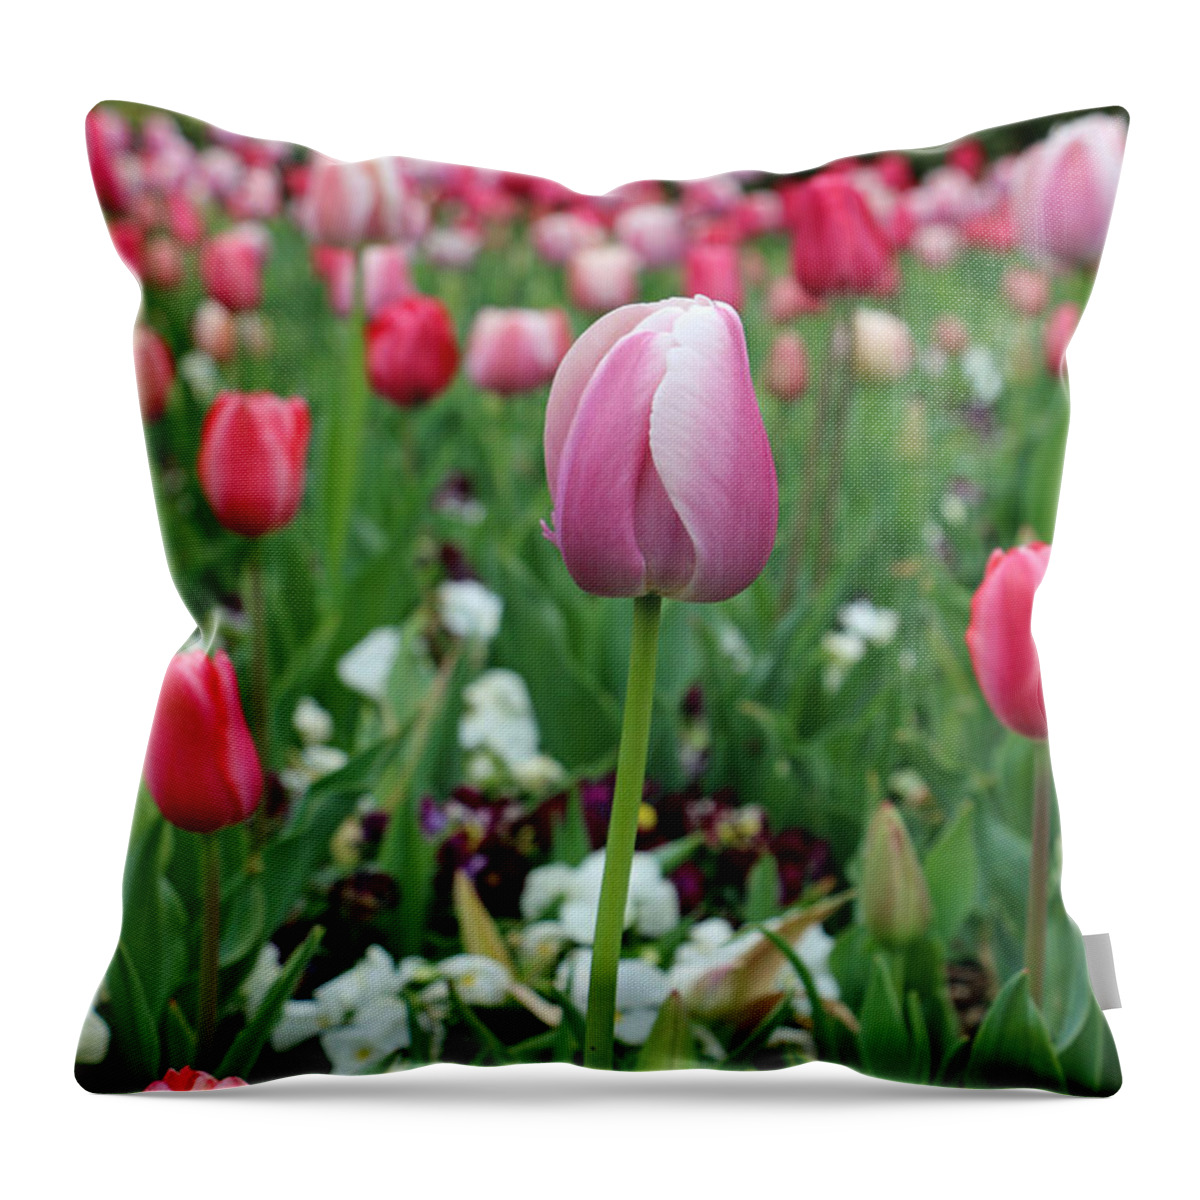 Tulip Throw Pillow featuring the photograph Texas Blooms 45 by Pamela Critchlow